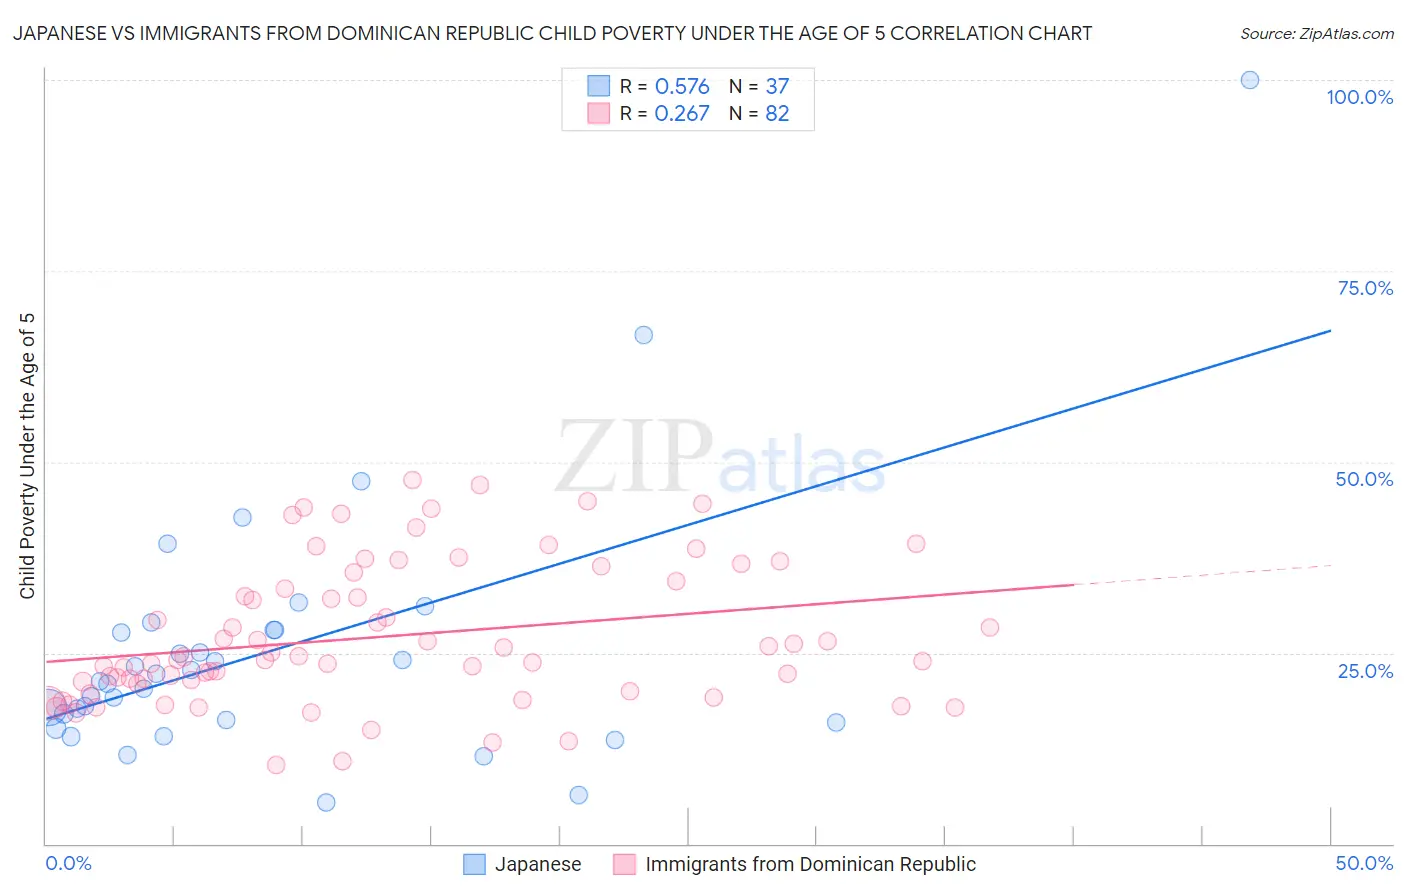 Japanese vs Immigrants from Dominican Republic Child Poverty Under the Age of 5